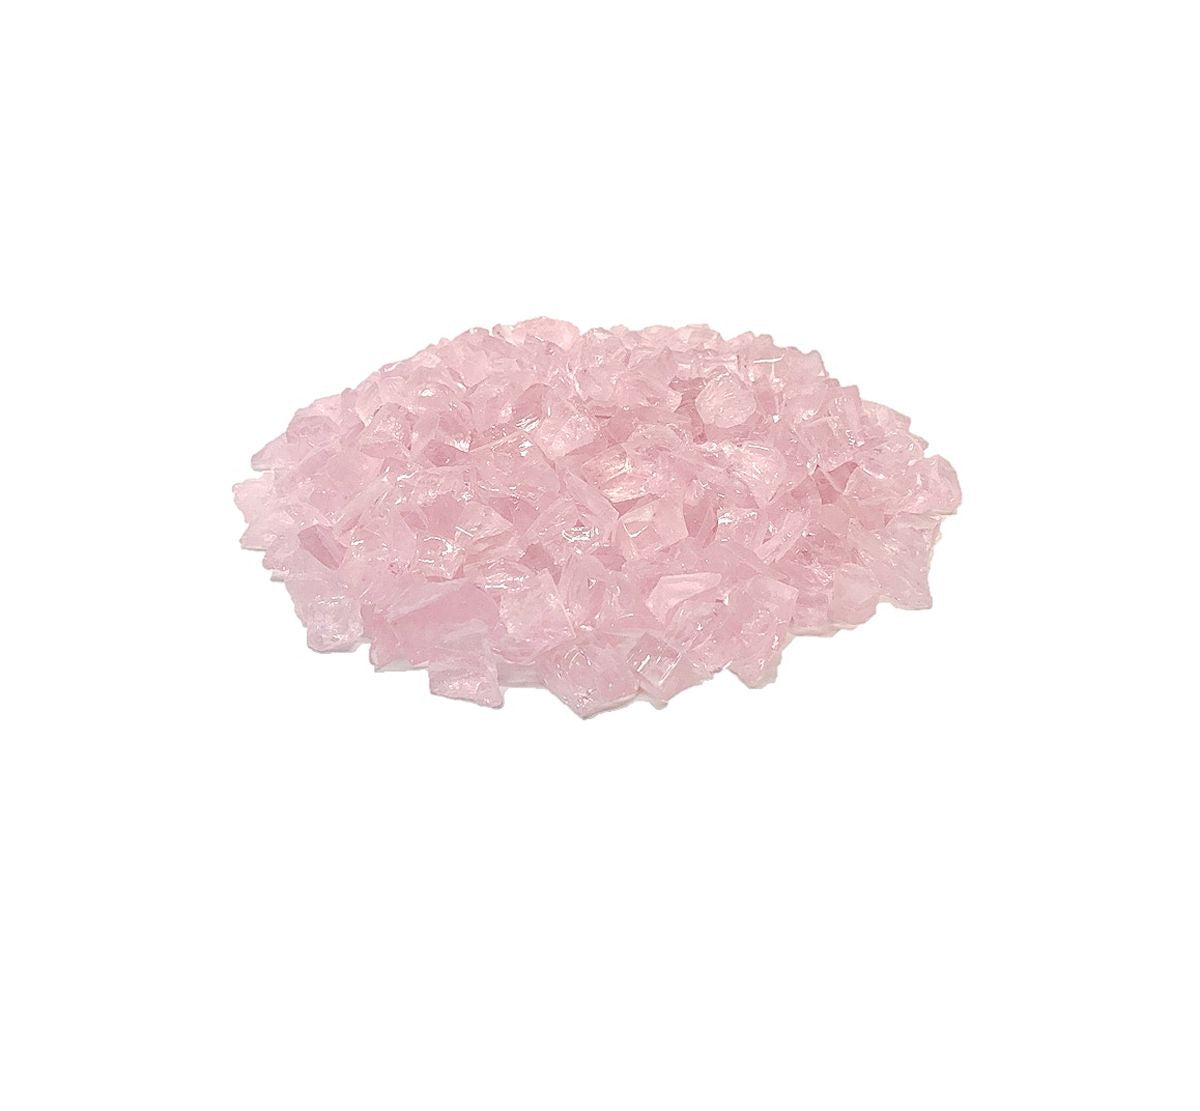 Enhance A Fire 0.75" 5 Lb. Pink Ice Recycled Crushed Fire Glass for Gas Fireplace, Electric Fireplace and Outdoor Gas Firepit